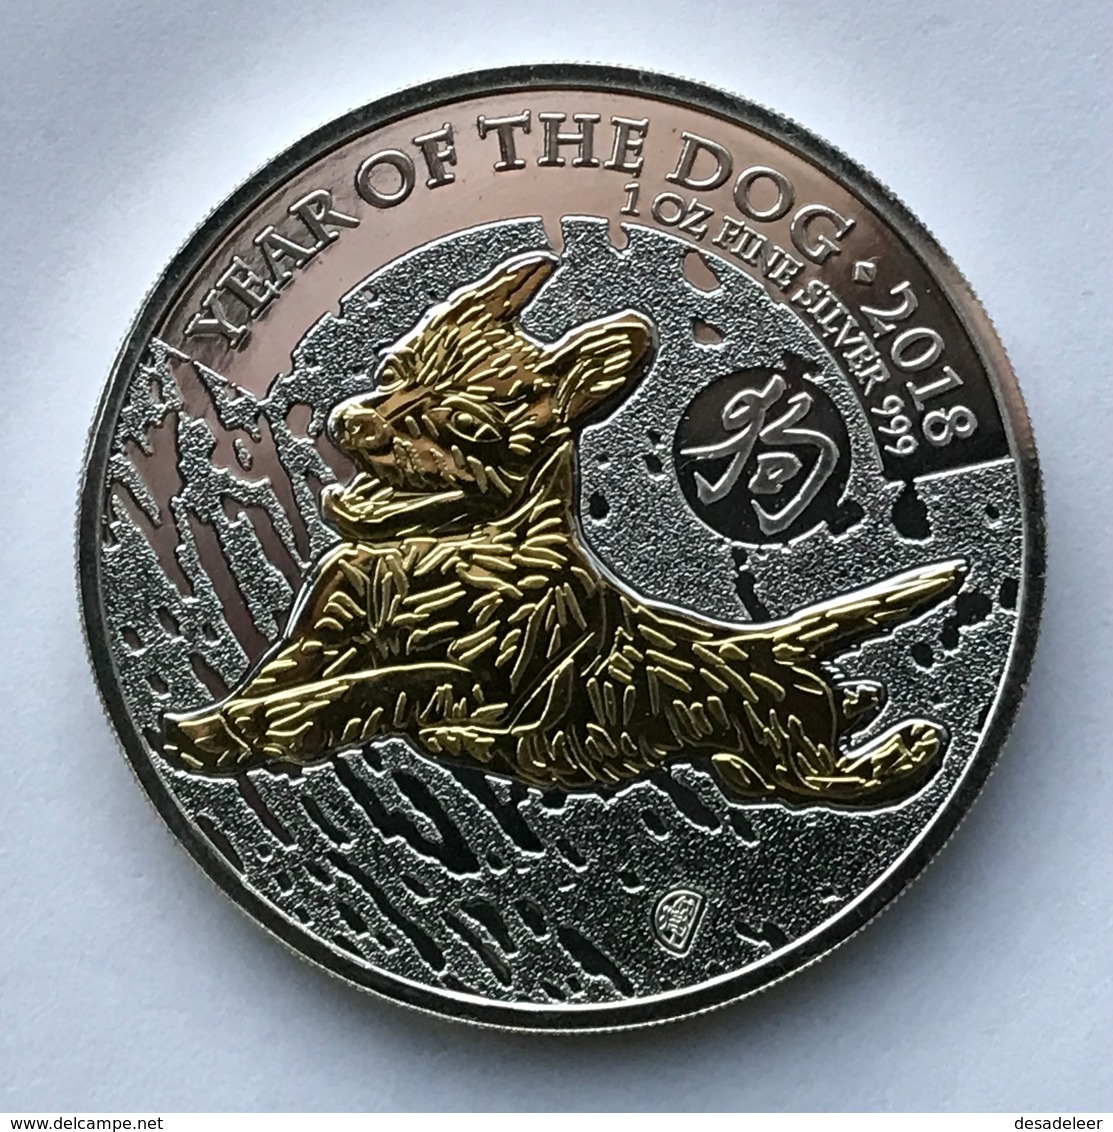 2 Pounds - United Kingdom 2018 - Year Of The Dog - Gilded Edtion, 999 Silver - 2 Pounds